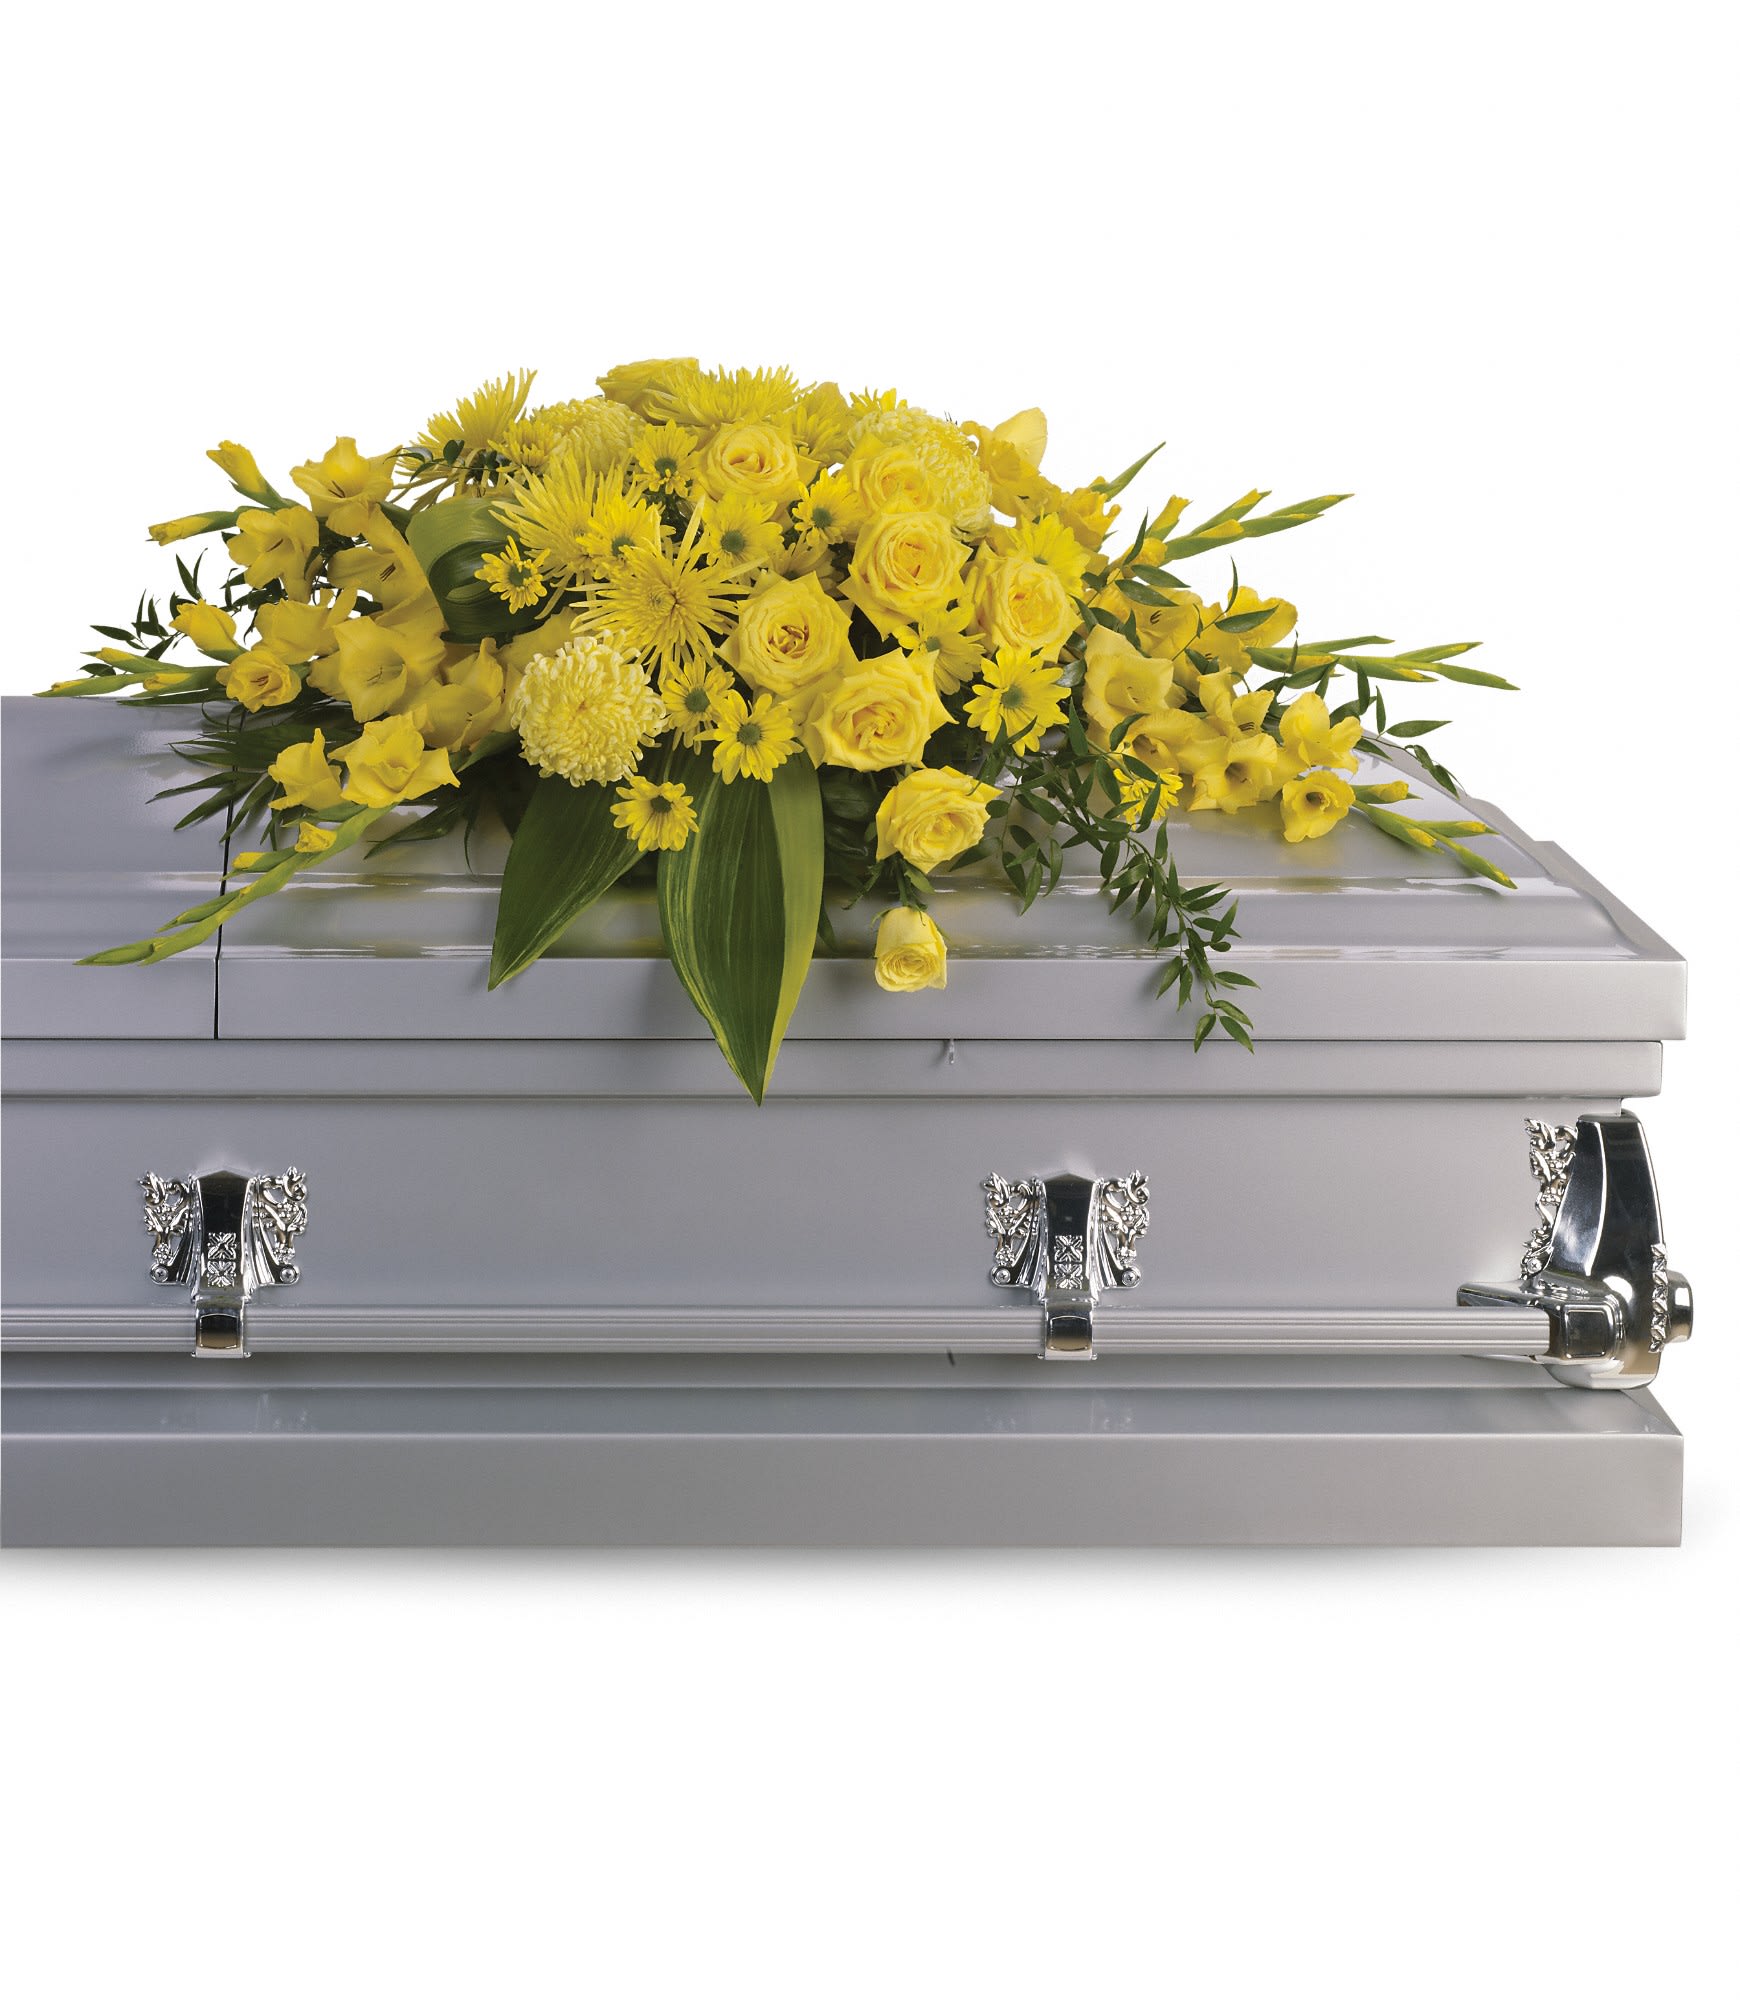 Graceful Grandeur Casket Spray by Teleflora - Joyous times and golden memories are recalled with this lovely half-couch casket spray that consoles the bereaved with a sunny array of beautiful blooms. 